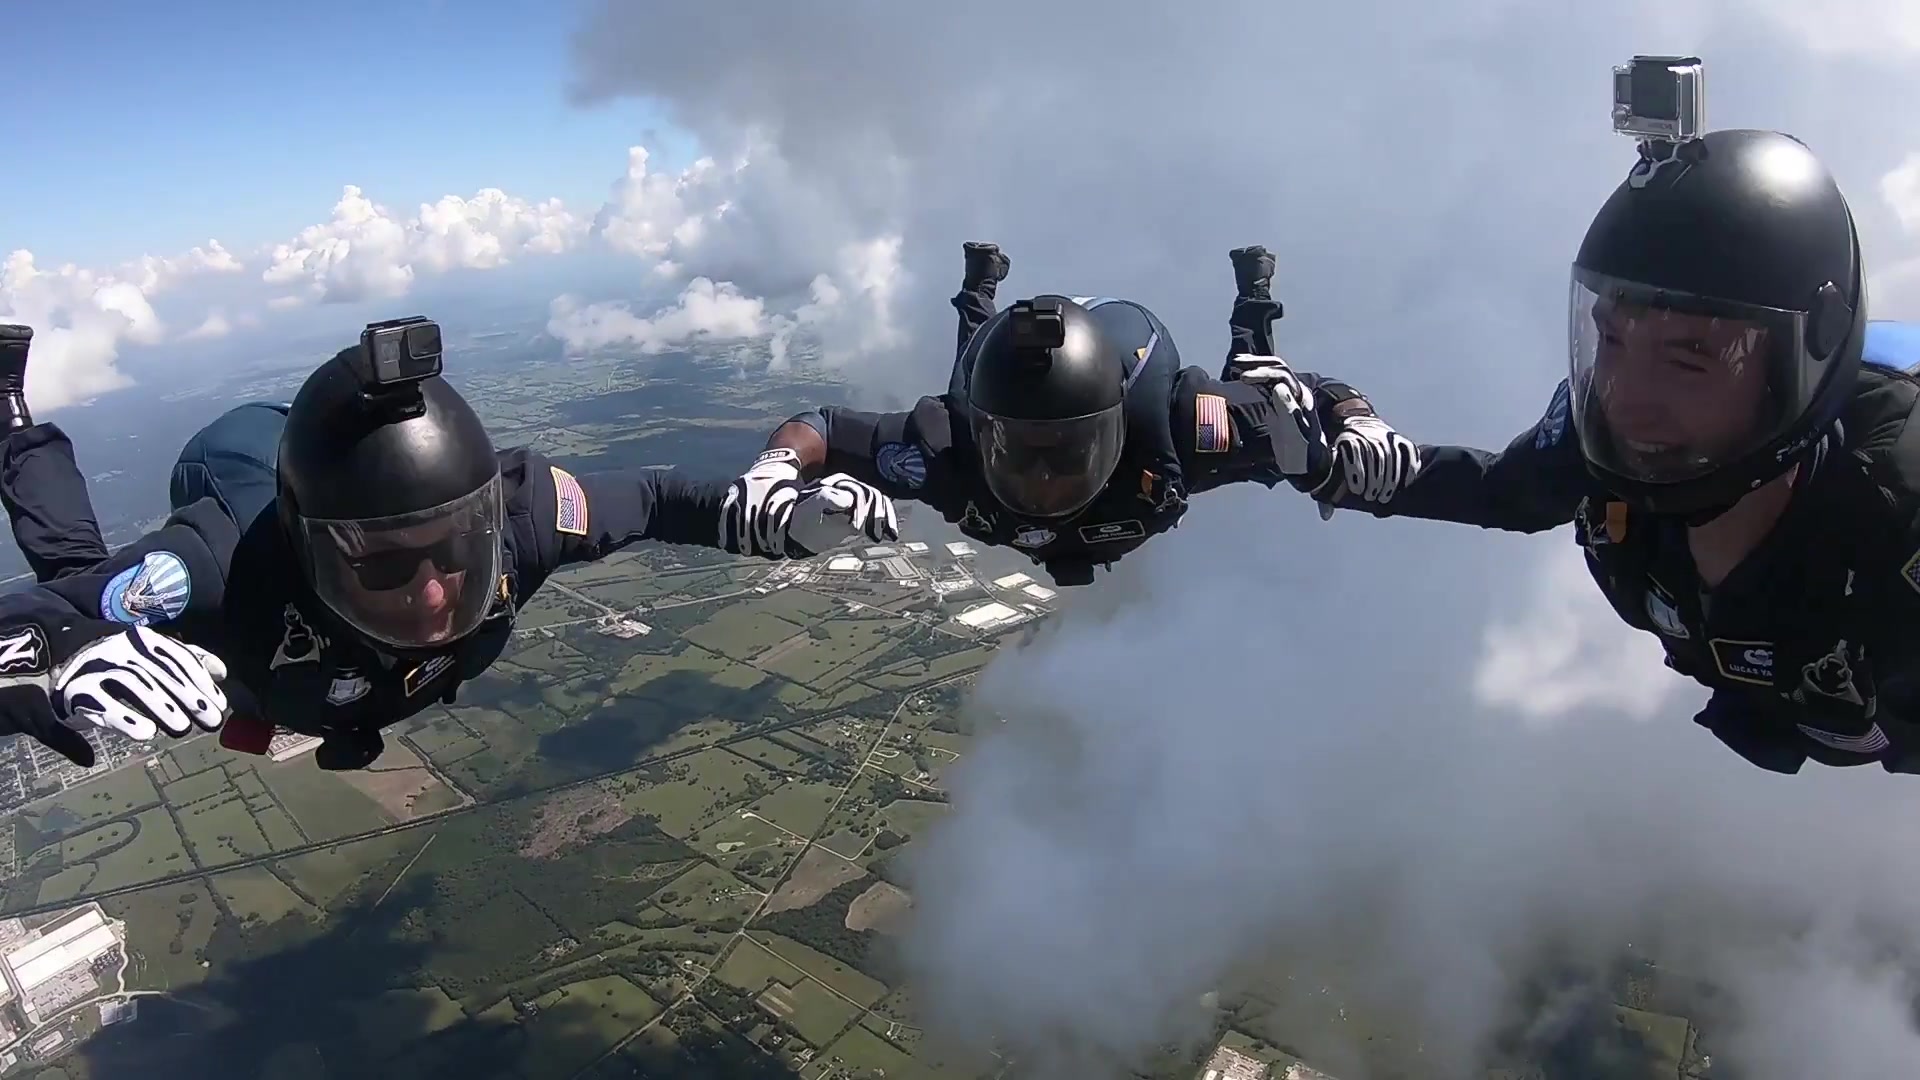 60 Second Promotional Video. Produced by GSD&M for, and released by, Headquarters Air Force Recruiting Service Marketing (AFRSHQ/RSM) for promotion of the Air Force Parachute Team 'Wings Of Blue'.